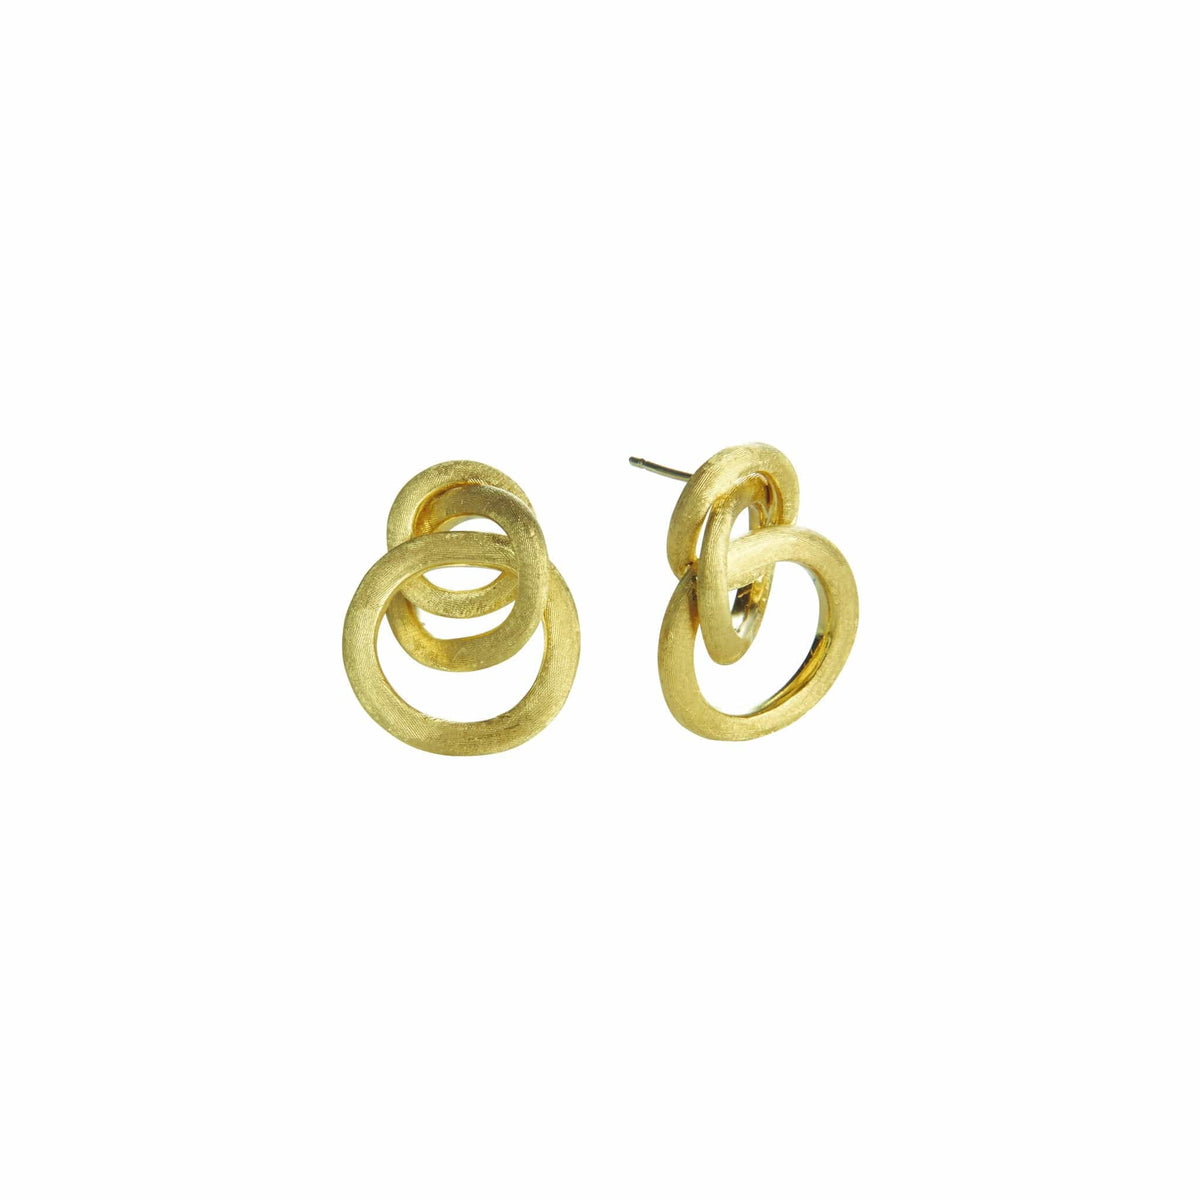 Marco Bicego Jaipur 18K Yellow Gold Knot Stud Earrings